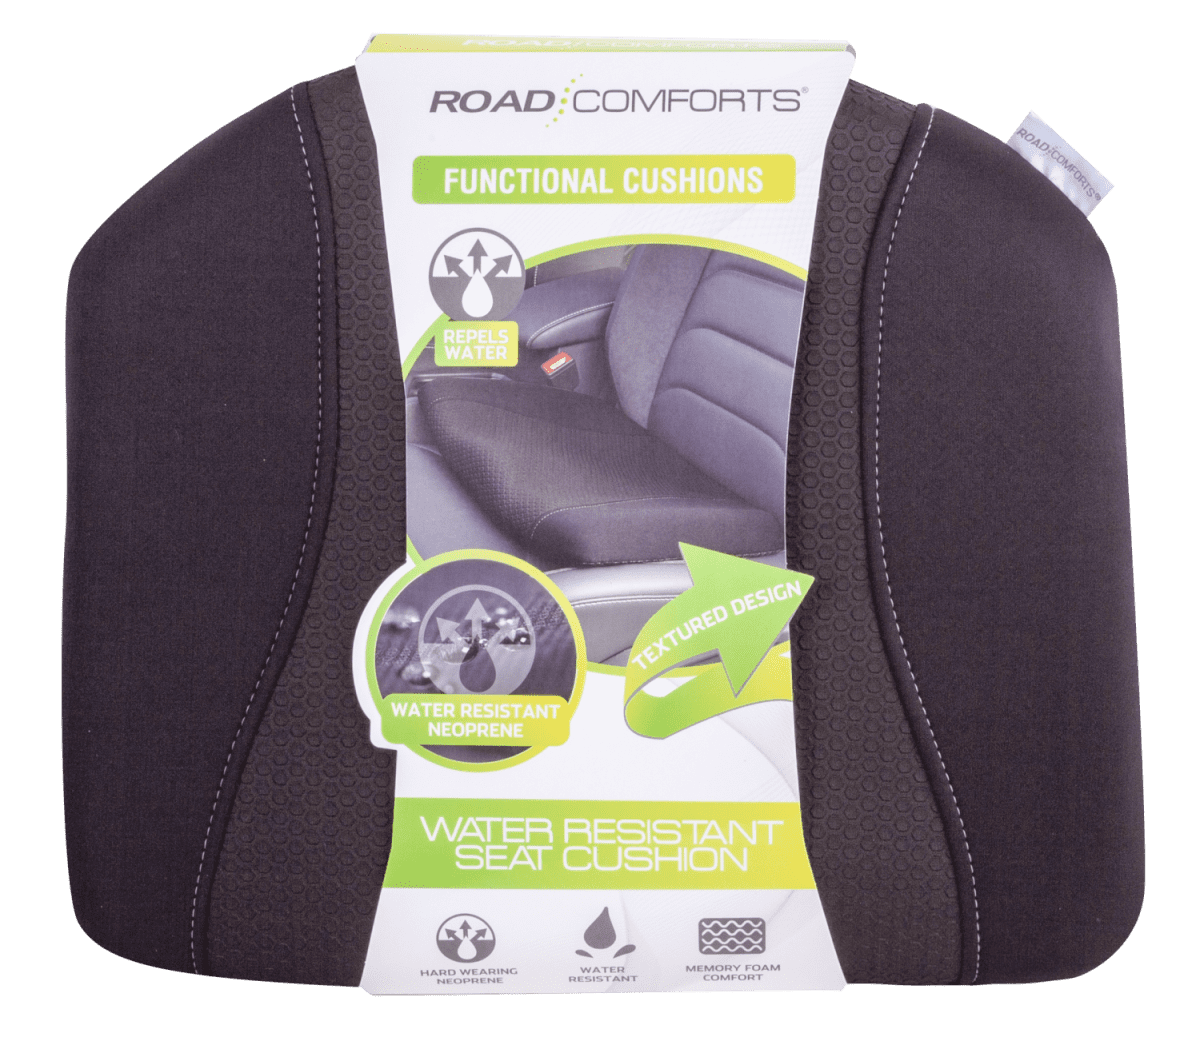 OLYDON Car Seat Cushion for Driving - Comfort Memory Foam for Car Driver  Seat- Back Support, Pain Relief - for Car Travel, Long Trips (Black)